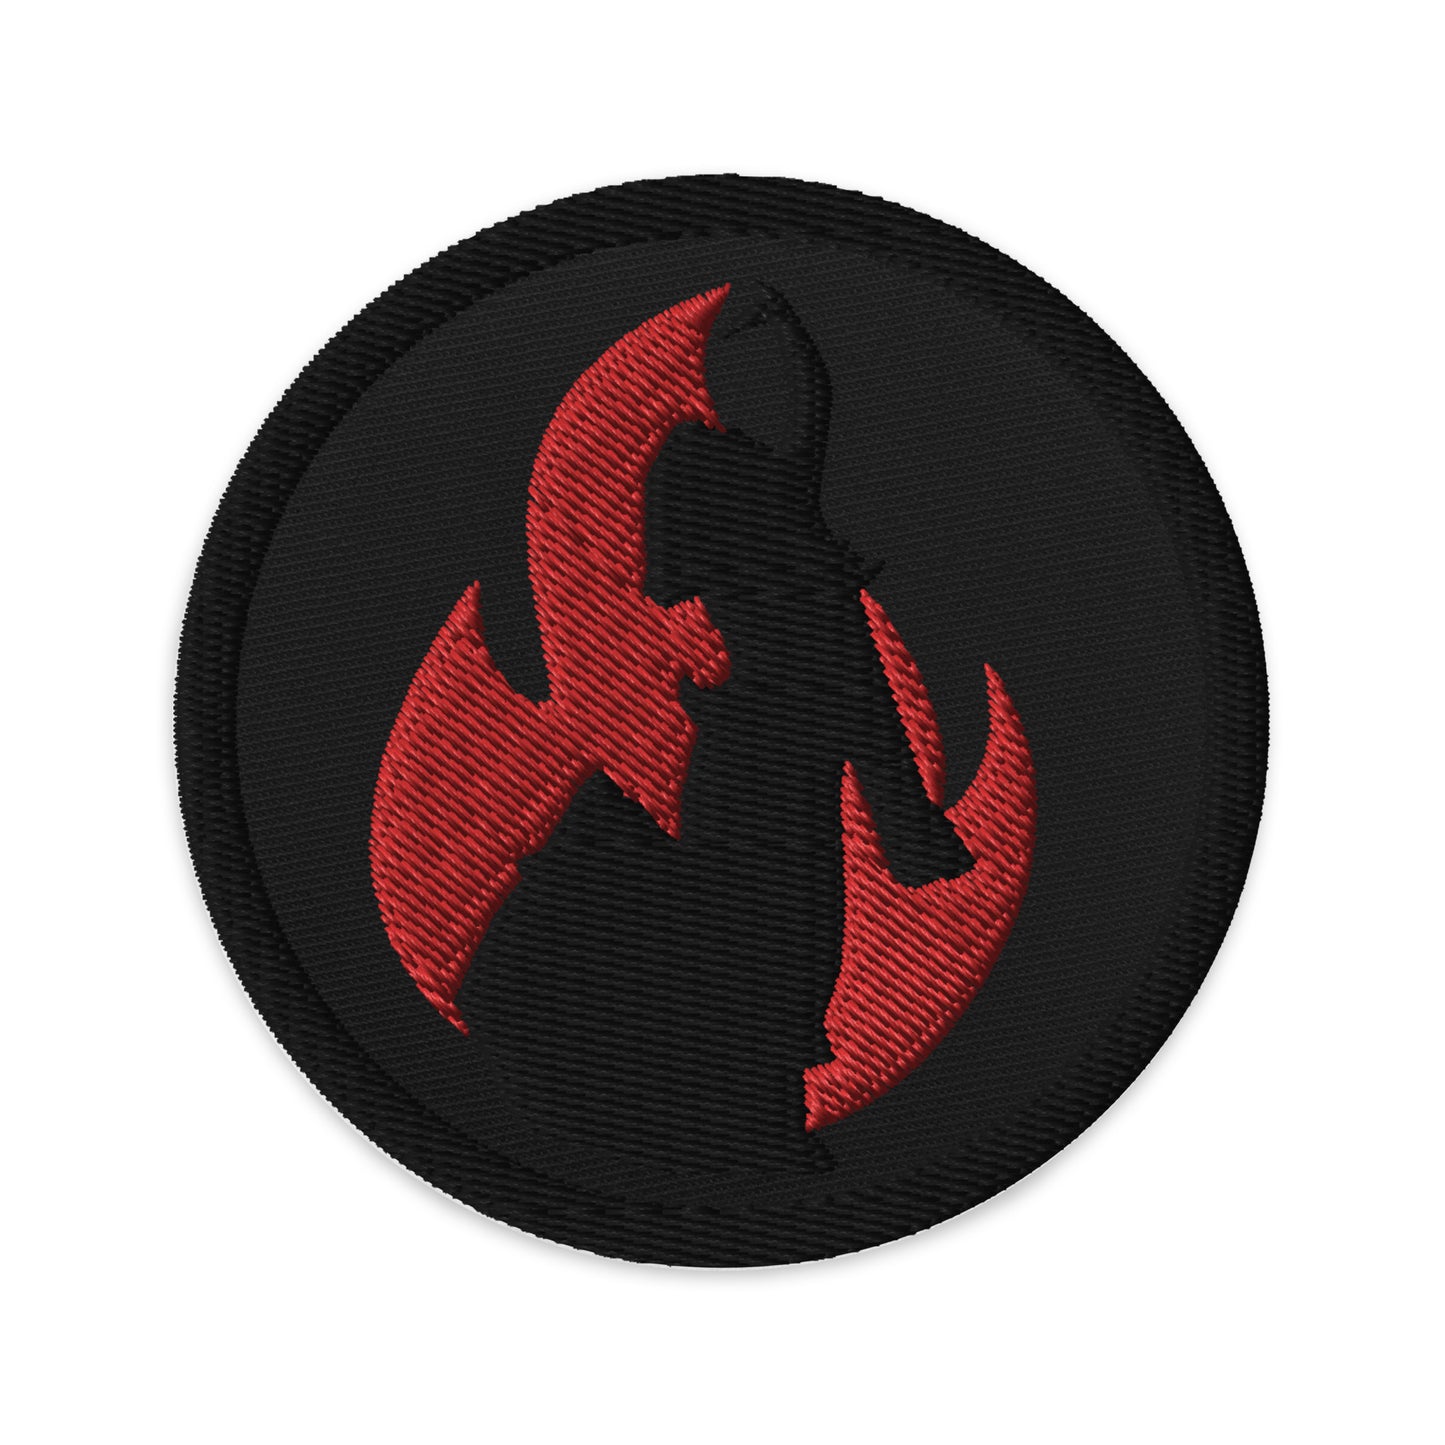 Flame (မီးတောက်) Embroidered patches